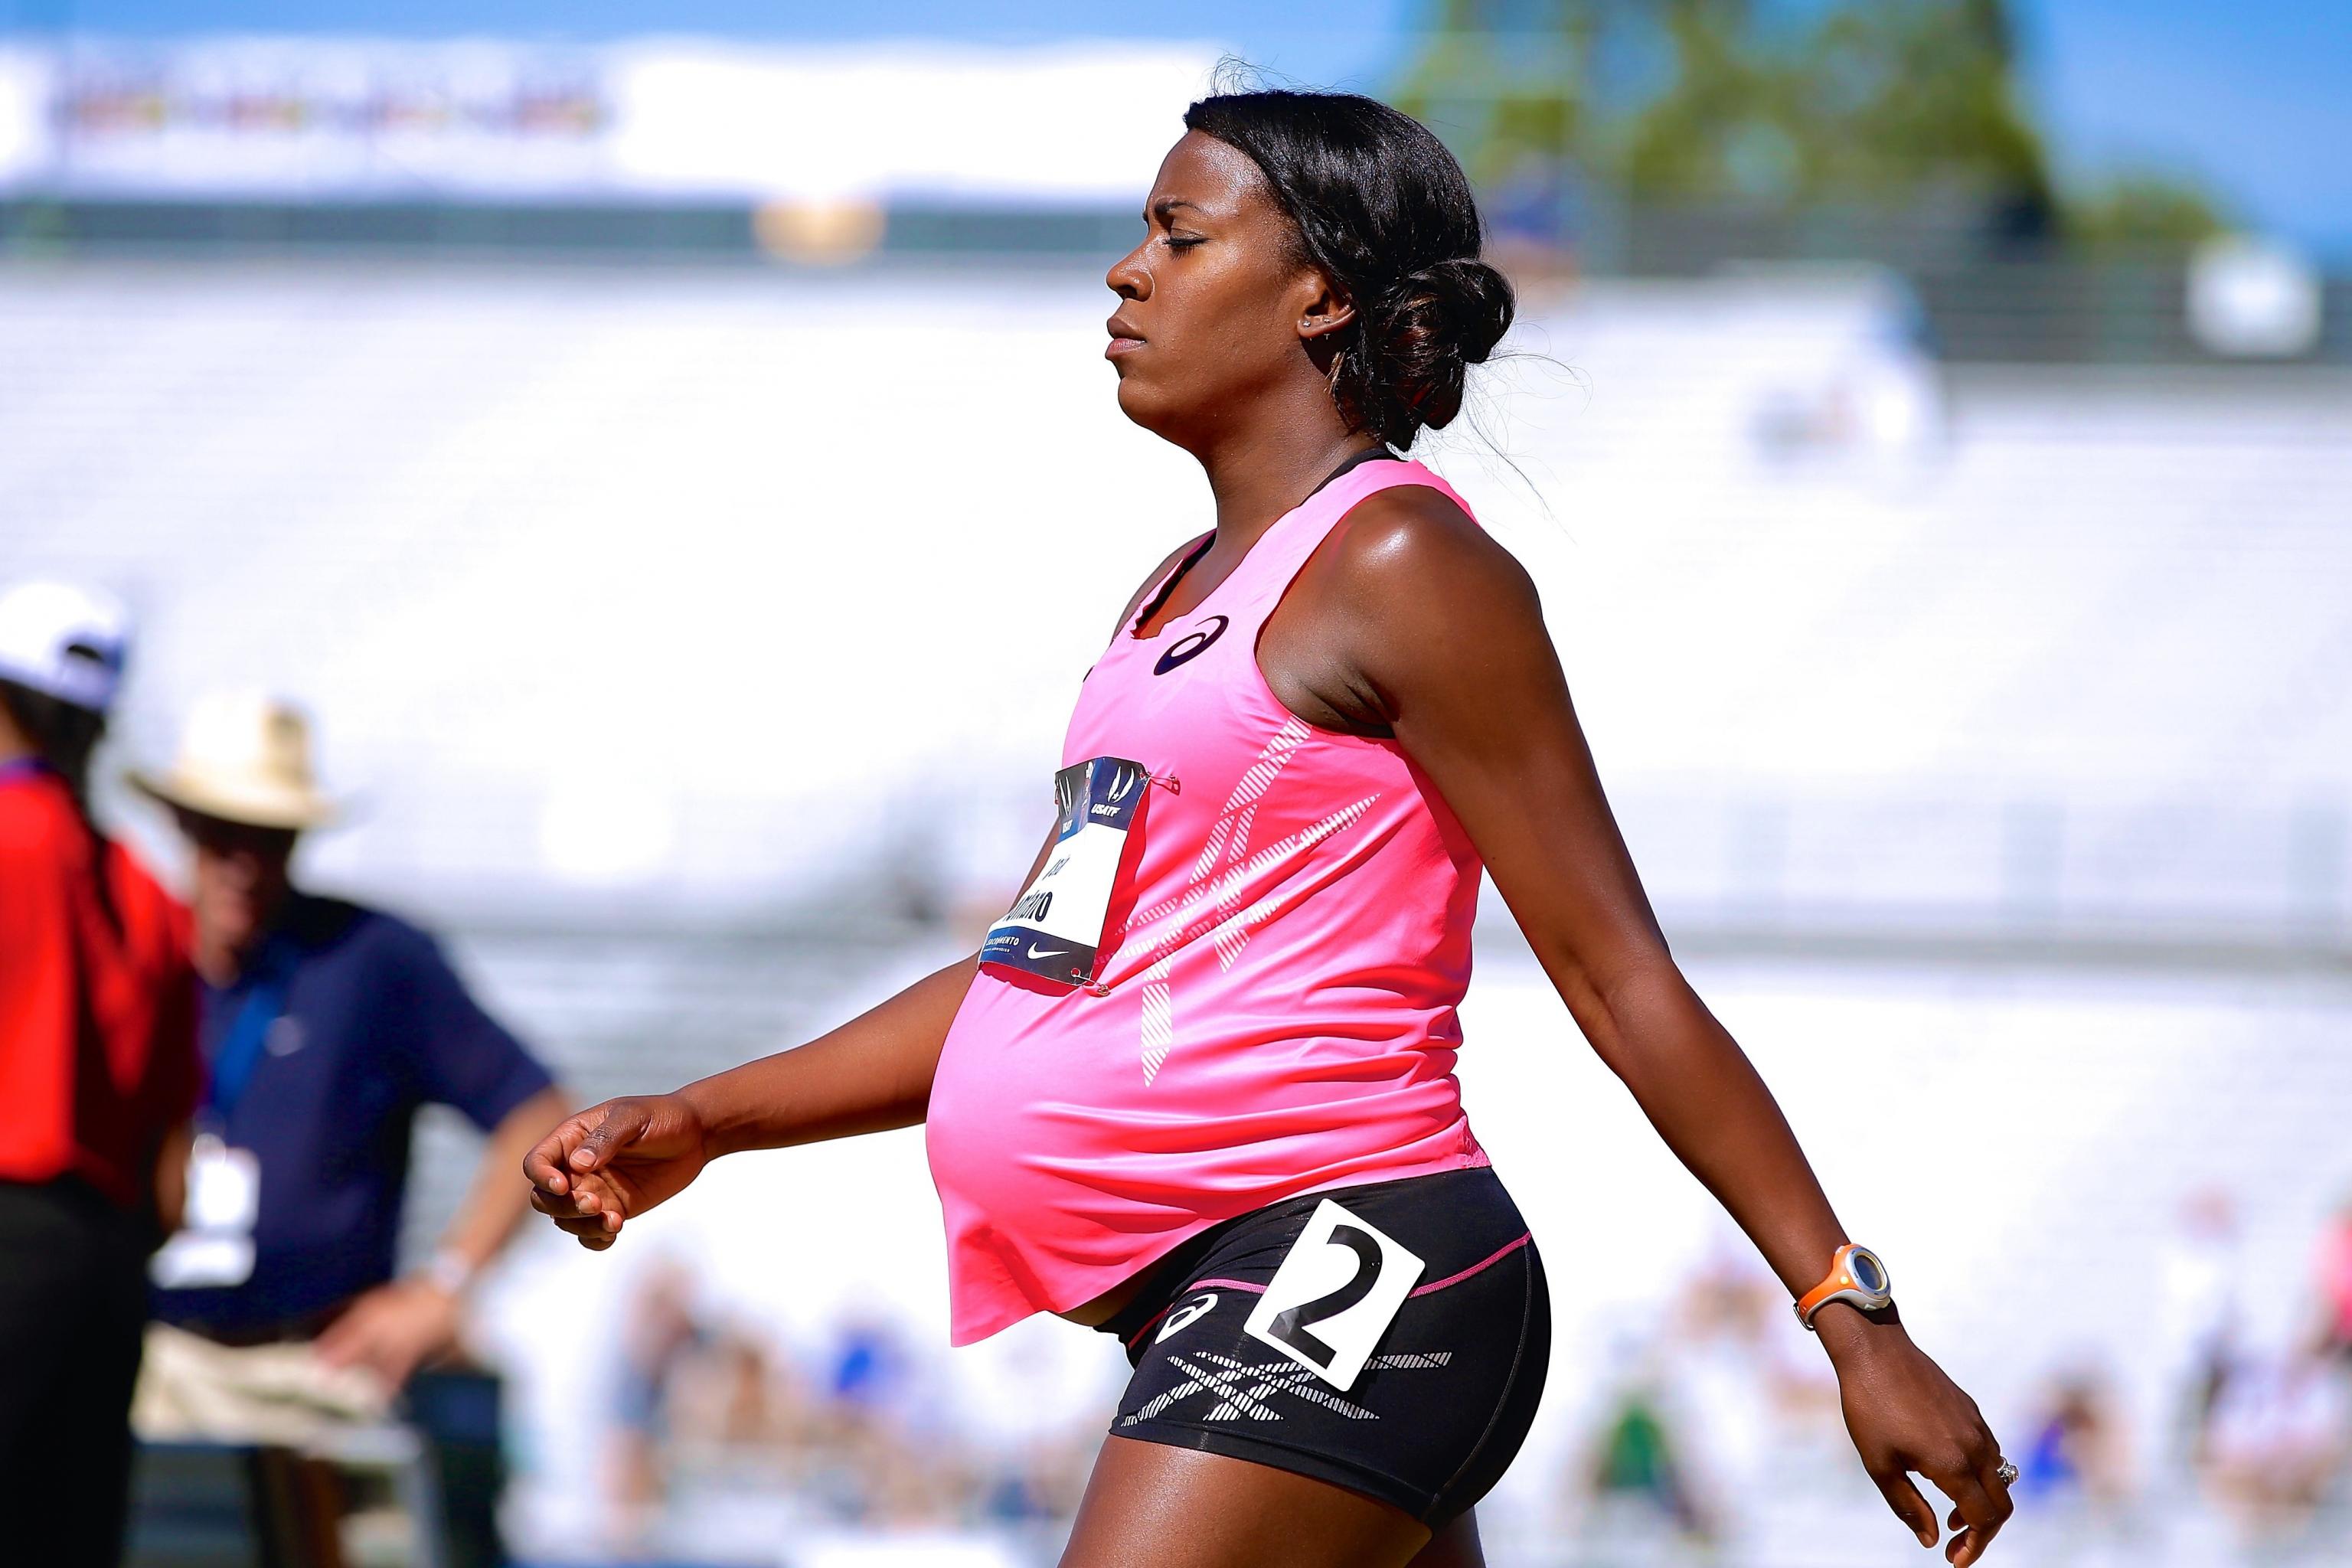 Alysia Montano Runs at U.S. Championships While 8 Months Pregnant |  Bleacher Report | Latest News, Videos and Highlights